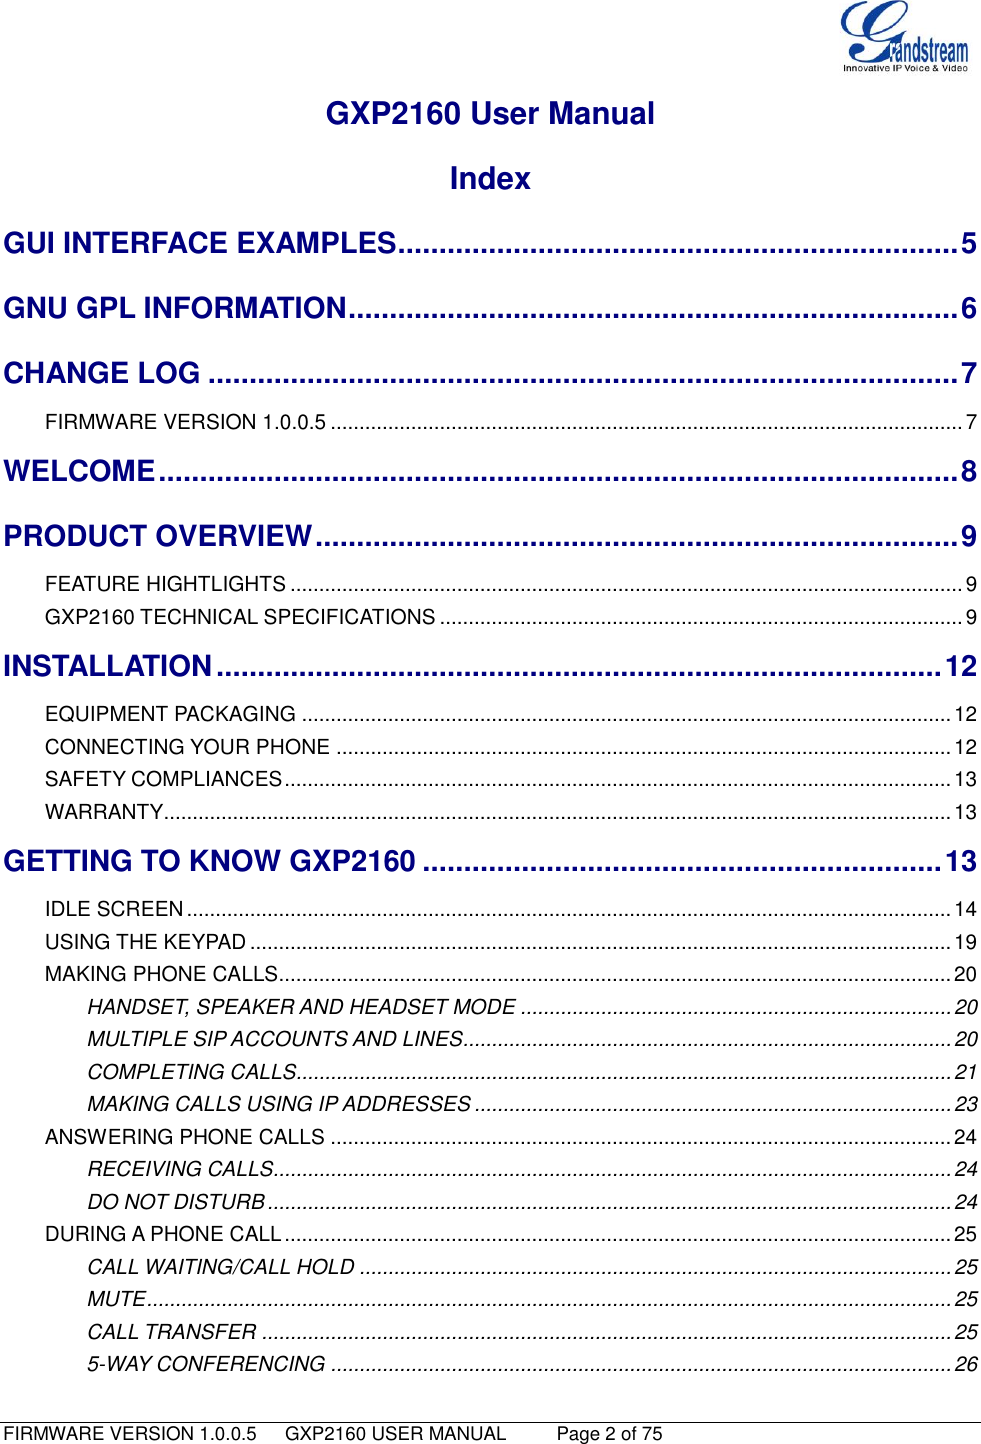   FIRMWARE VERSION 1.0.0.5   GXP2160 USER MANUAL     Page 2 of 75                                   GXP2160 User Manual Index GUI INTERFACE EXAMPLES .................................................................... 5 GNU GPL INFORMATION .......................................................................... 6 CHANGE LOG ........................................................................................... 7 FIRMWARE VERSION 1.0.0.5 .............................................................................................................. 7 WELCOME ................................................................................................. 8 PRODUCT OVERVIEW .............................................................................. 9 FEATURE HIGHTLIGHTS ..................................................................................................................... 9 GXP2160 TECHNICAL SPECIFICATIONS ........................................................................................... 9 INSTALLATION ........................................................................................ 12 EQUIPMENT PACKAGING ................................................................................................................. 12 CONNECTING YOUR PHONE ........................................................................................................... 12 SAFETY COMPLIANCES .................................................................................................................... 13 WARRANTY ......................................................................................................................................... 13 GETTING TO KNOW GXP2160 ............................................................... 13 IDLE SCREEN ..................................................................................................................................... 14 USING THE KEYPAD .......................................................................................................................... 19 MAKING PHONE CALLS..................................................................................................................... 20 HANDSET, SPEAKER AND HEADSET MODE ........................................................................... 20 MULTIPLE SIP ACCOUNTS AND LINES ..................................................................................... 20 COMPLETING CALLS.................................................................................................................. 21 MAKING CALLS USING IP ADDRESSES ................................................................................... 23 ANSWERING PHONE CALLS ............................................................................................................ 24 RECEIVING CALLS...................................................................................................................... 24 DO NOT DISTURB ....................................................................................................................... 24 DURING A PHONE CALL .................................................................................................................... 25 CALL WAITING/CALL HOLD ....................................................................................................... 25 MUTE ............................................................................................................................................ 25 CALL TRANSFER ........................................................................................................................ 25 5-WAY CONFERENCING ............................................................................................................ 26 